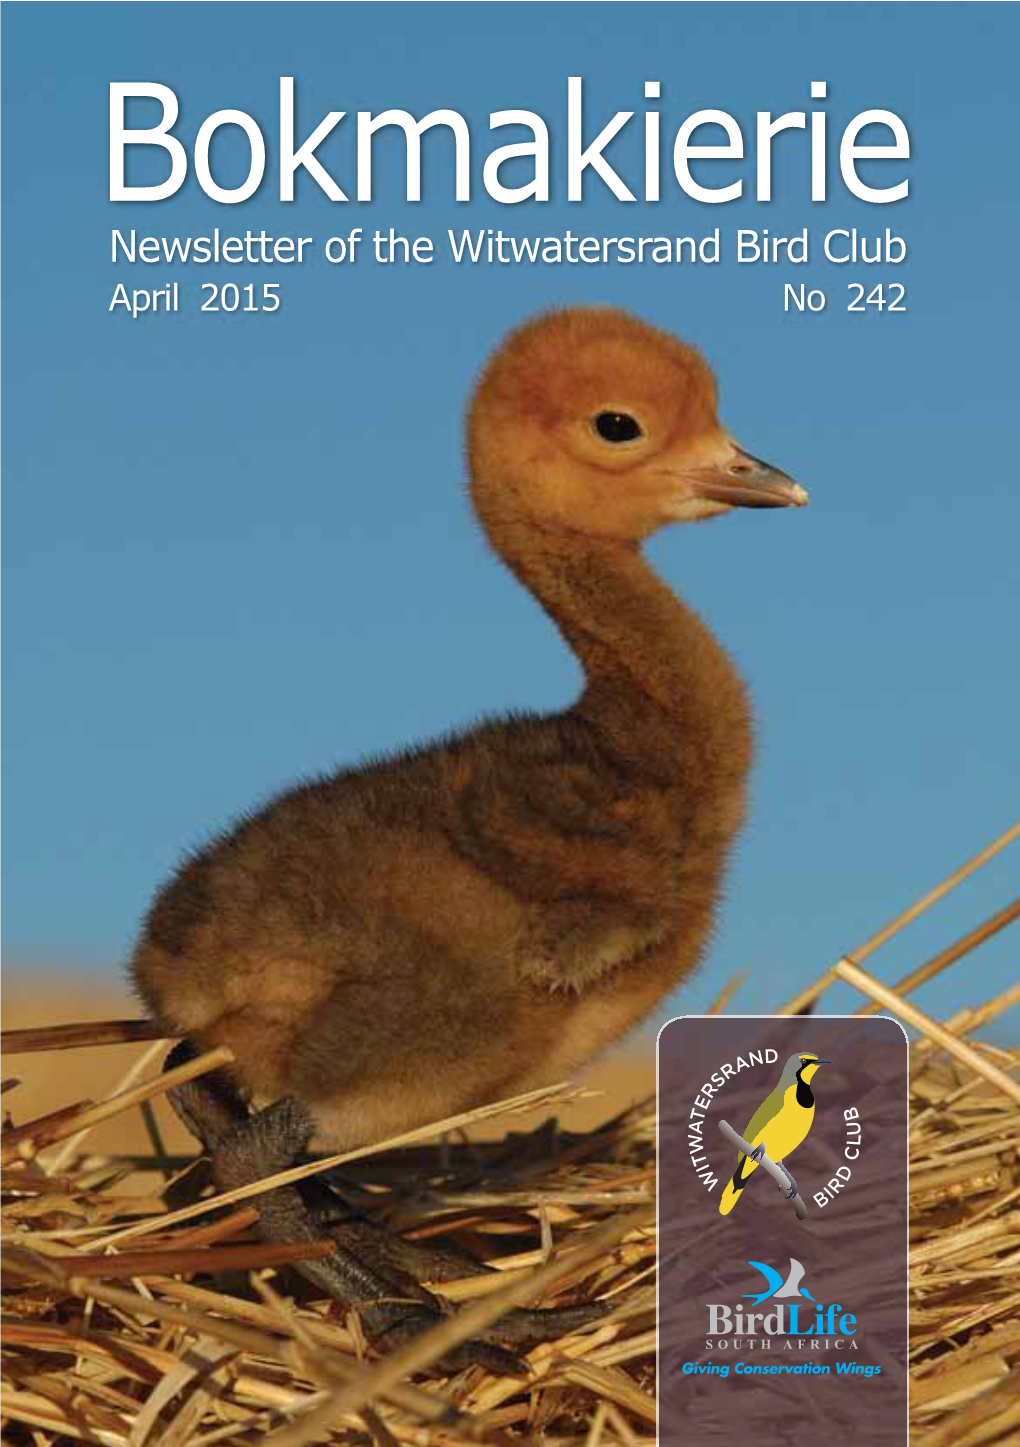 Bokmakierie Newsletter of the Witwatersrand Bird Club April 2015 No 242